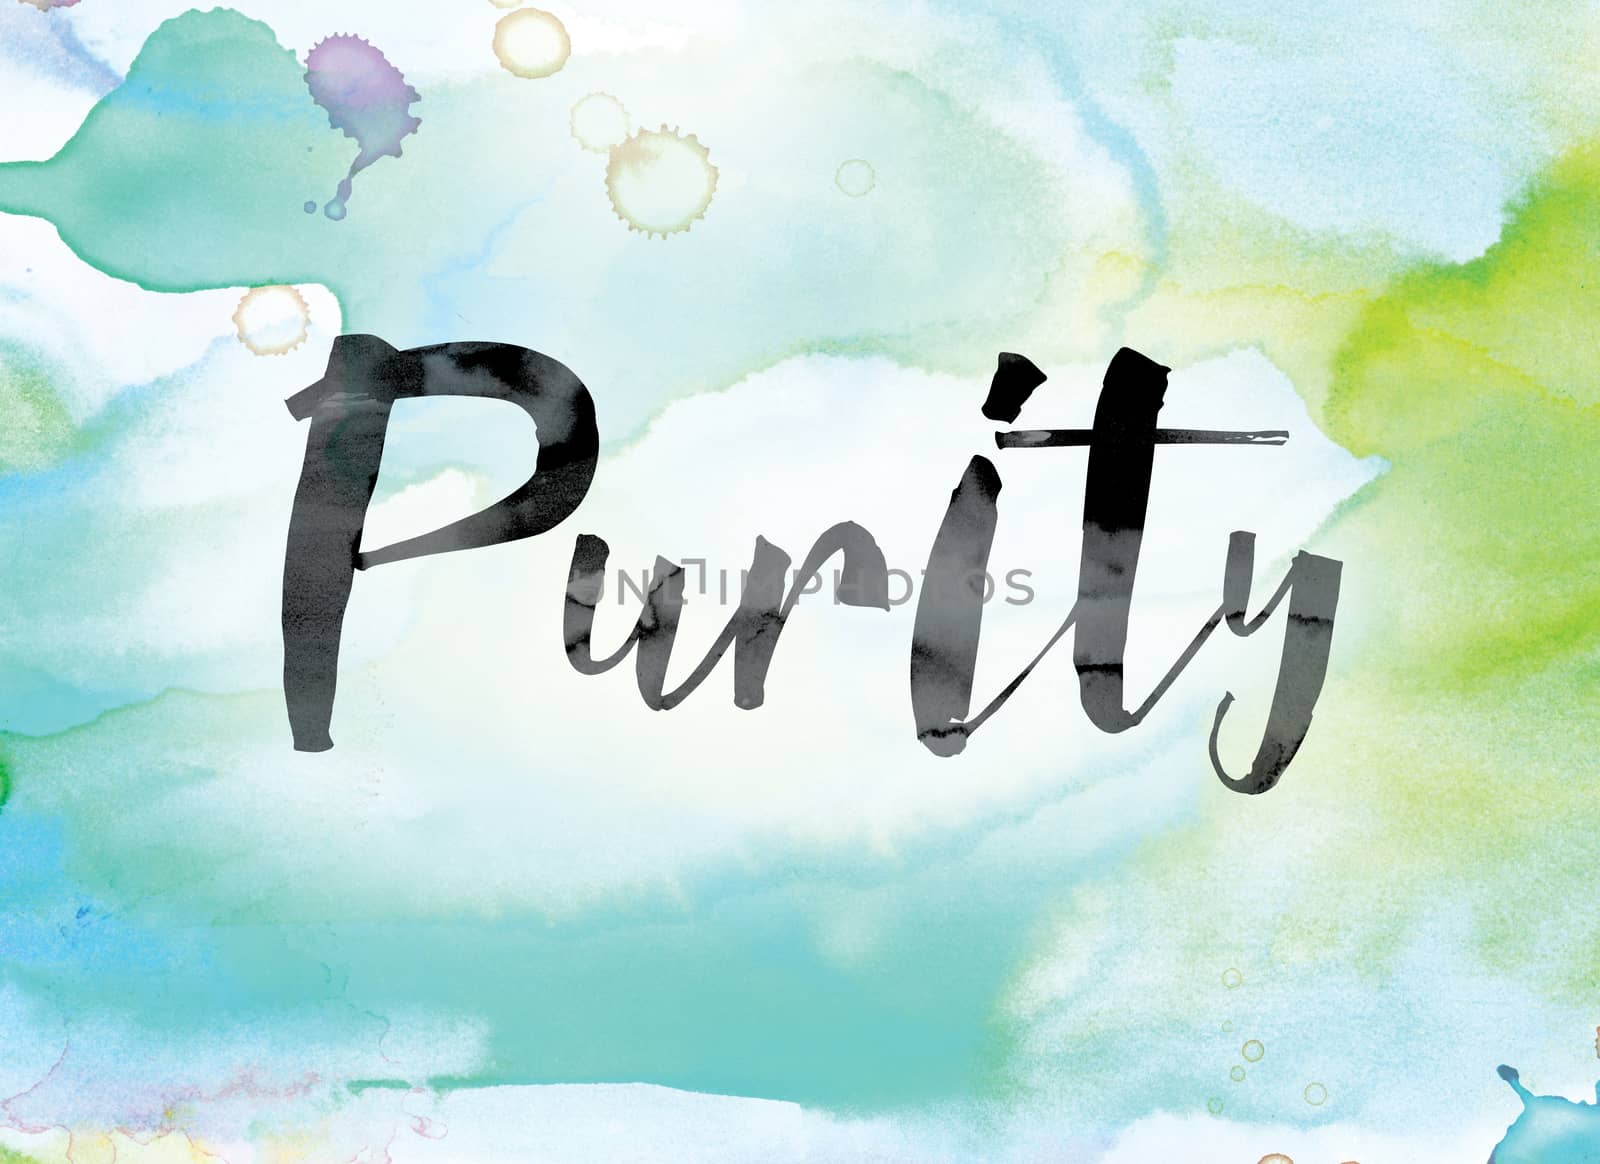 The word "Purity" painted in black ink over a colorful watercolor washed background concept and theme.